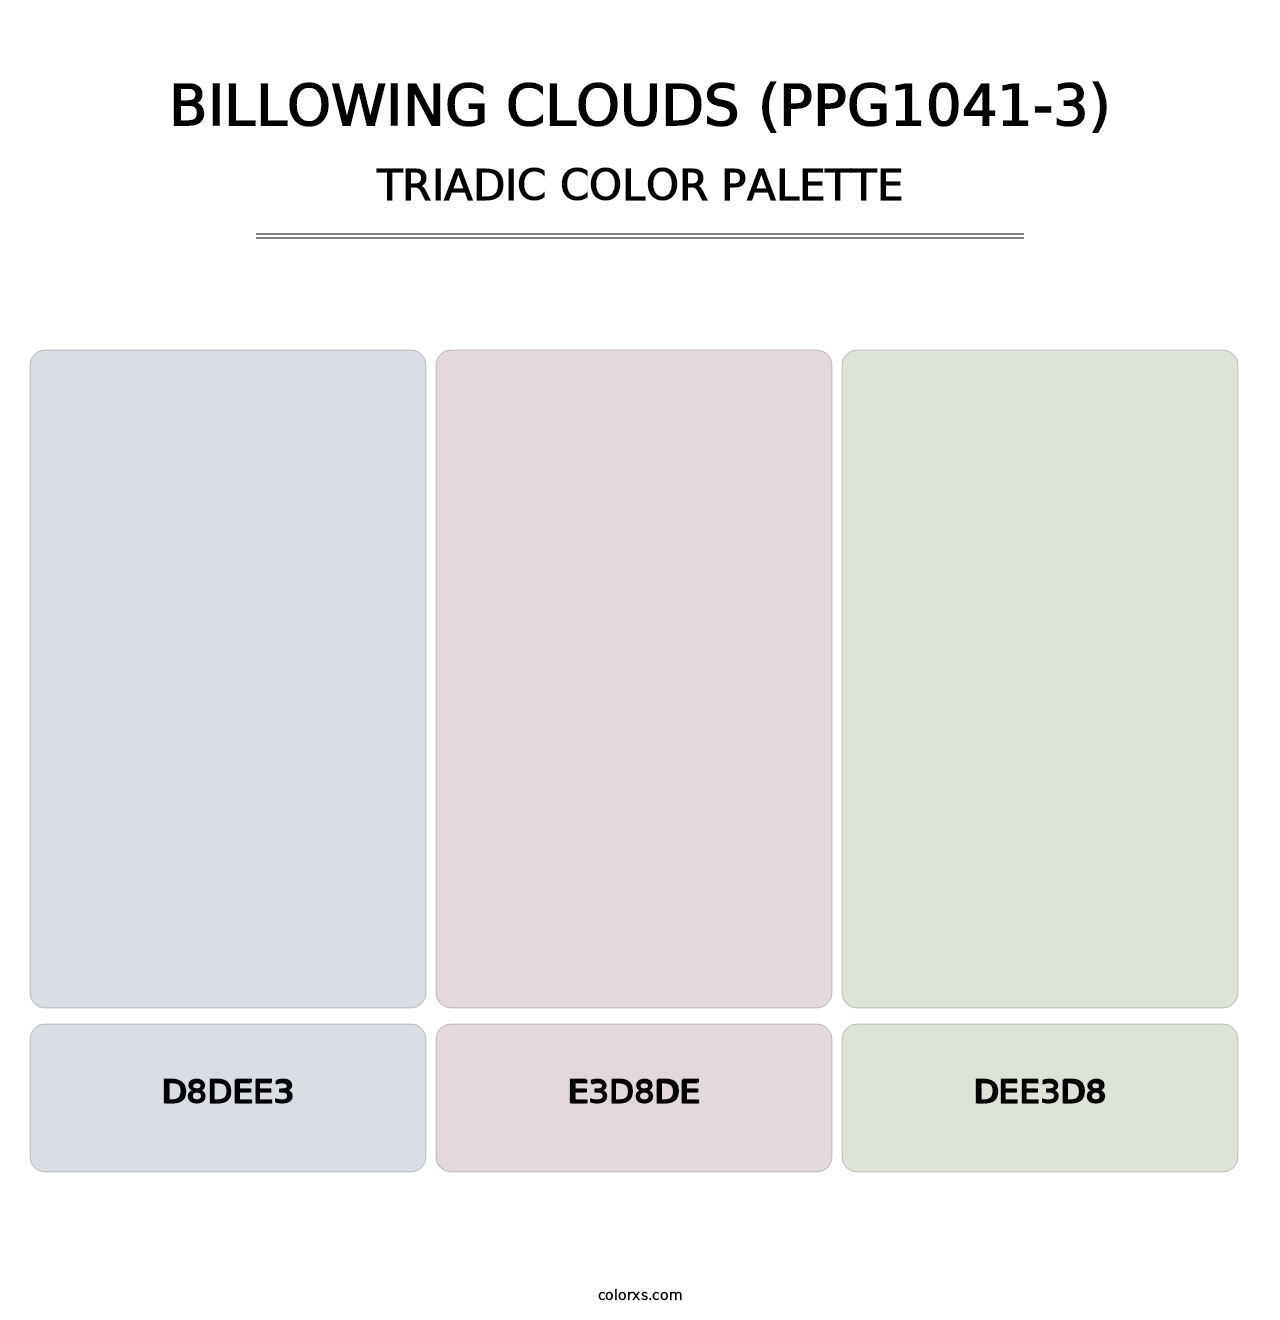 Billowing Clouds (PPG1041-3) - Triadic Color Palette